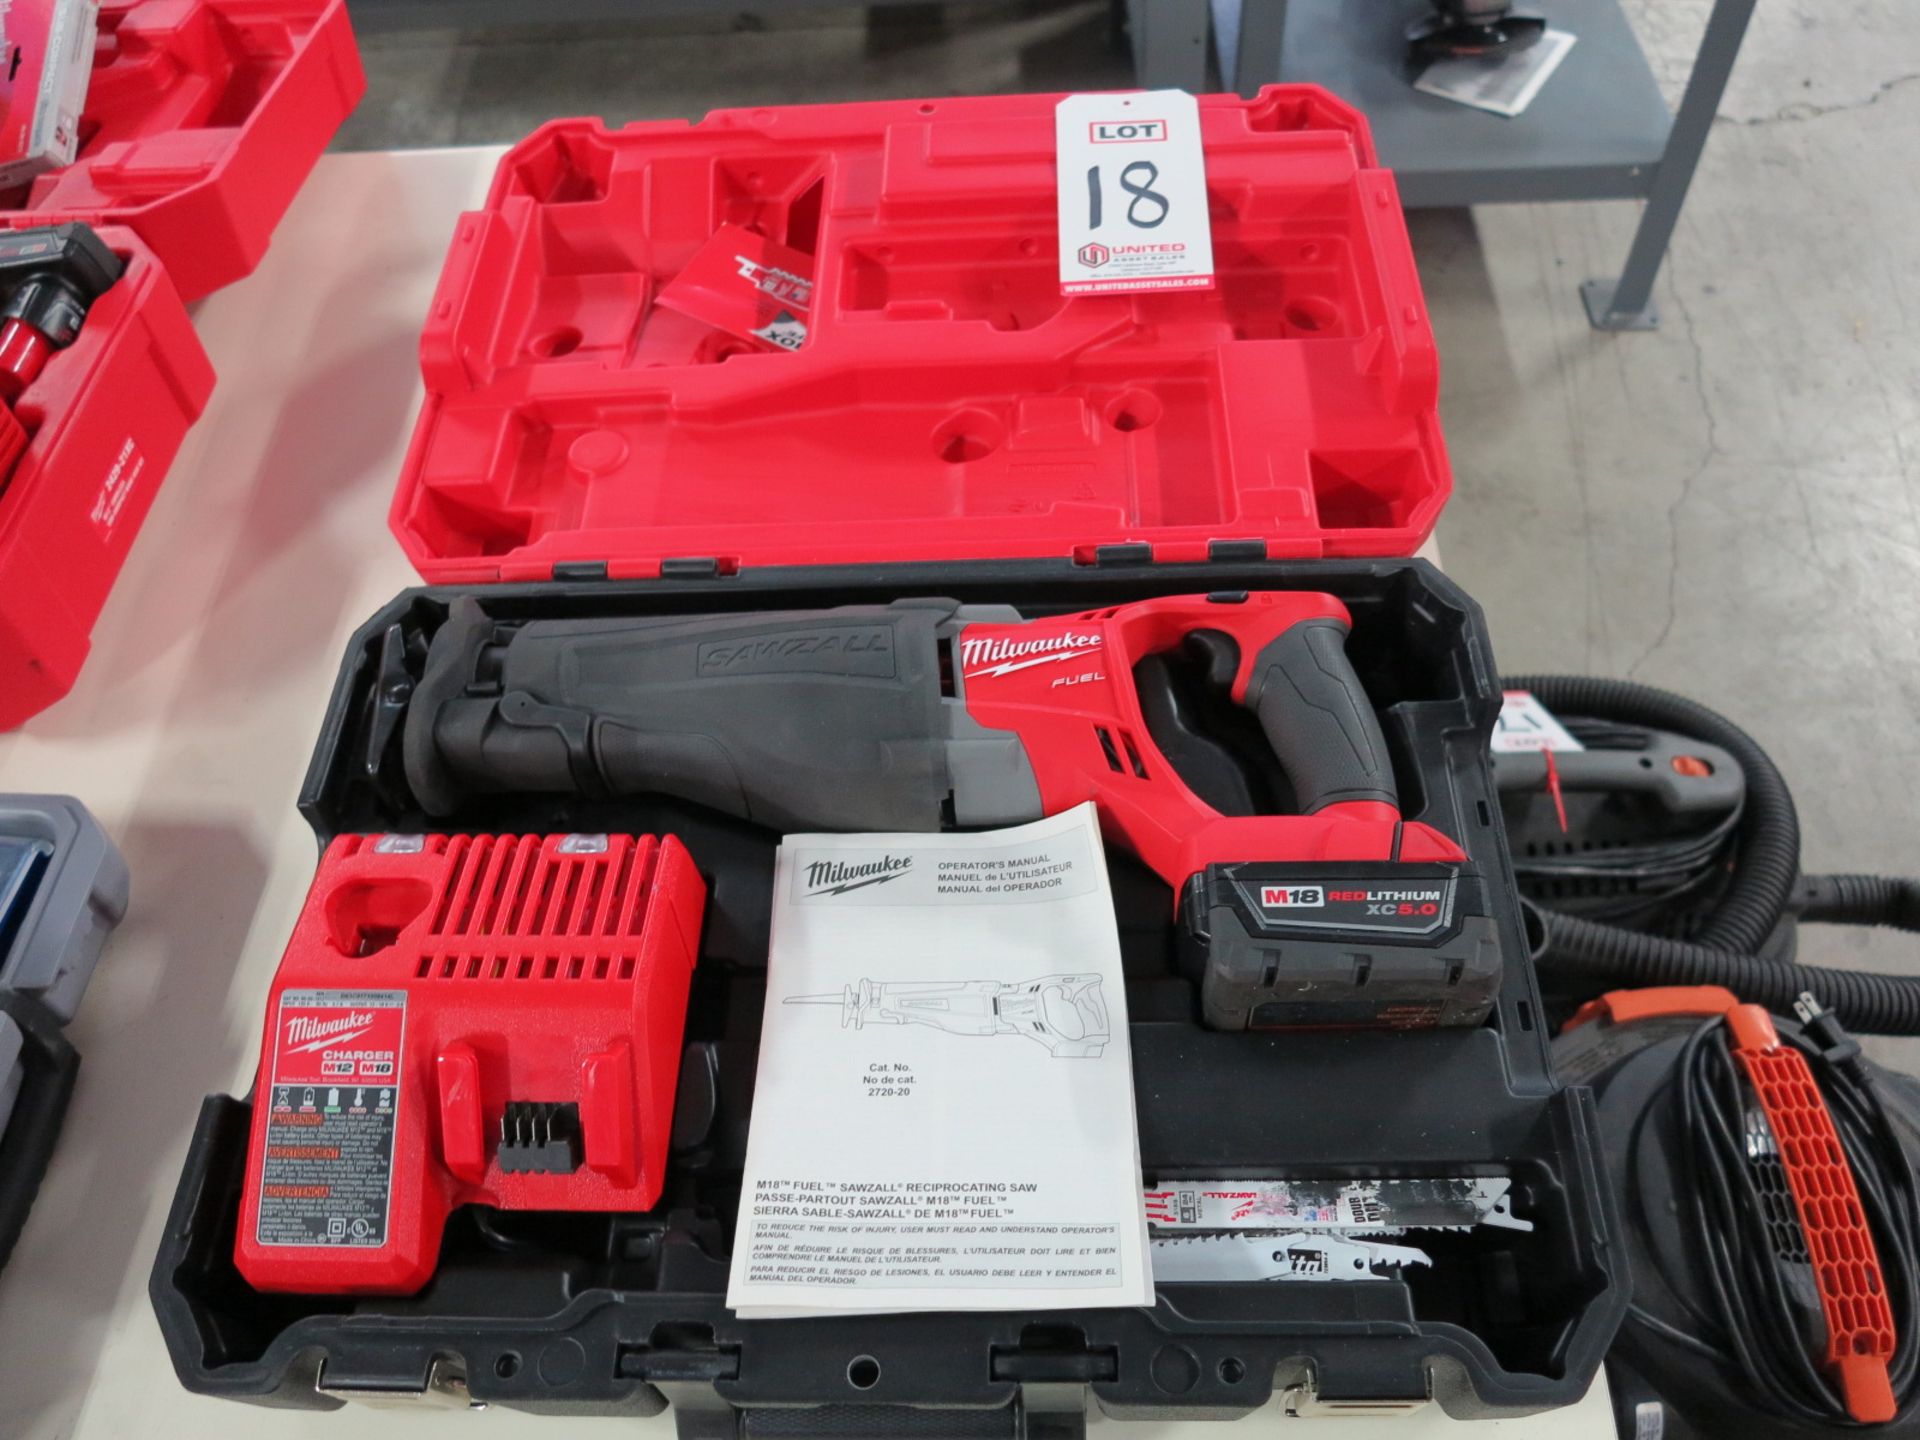 MILWAUKEE M18 FUEL SAWZALL, W/ BATTERY, CHARGER, CASE, CAT. NO. 2720-20, 18V